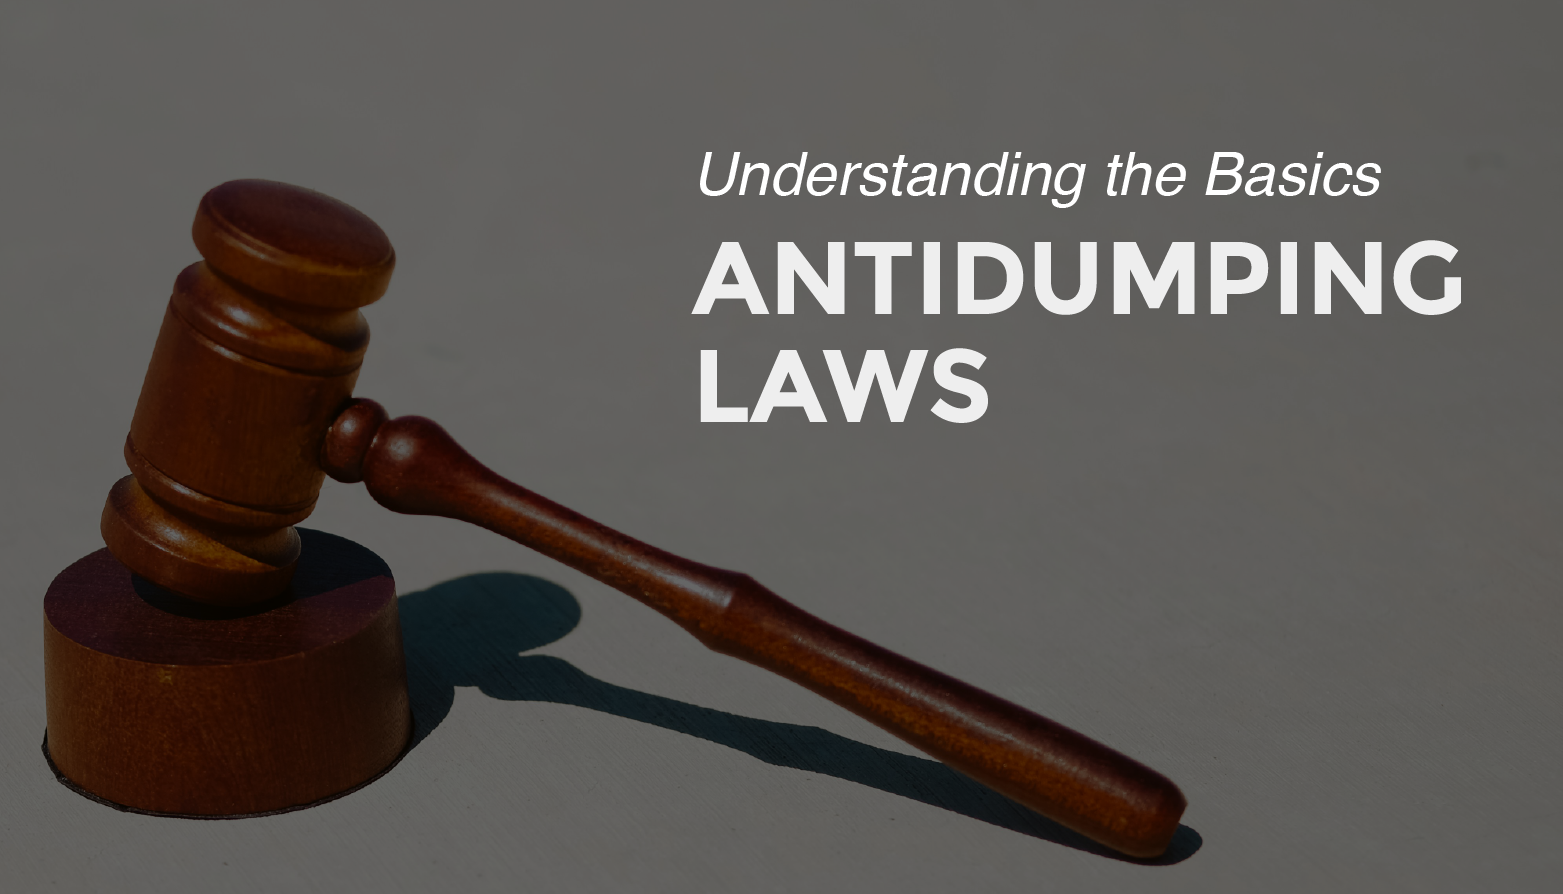 Understand the basics of antidumping laws to protect yourself from risk.